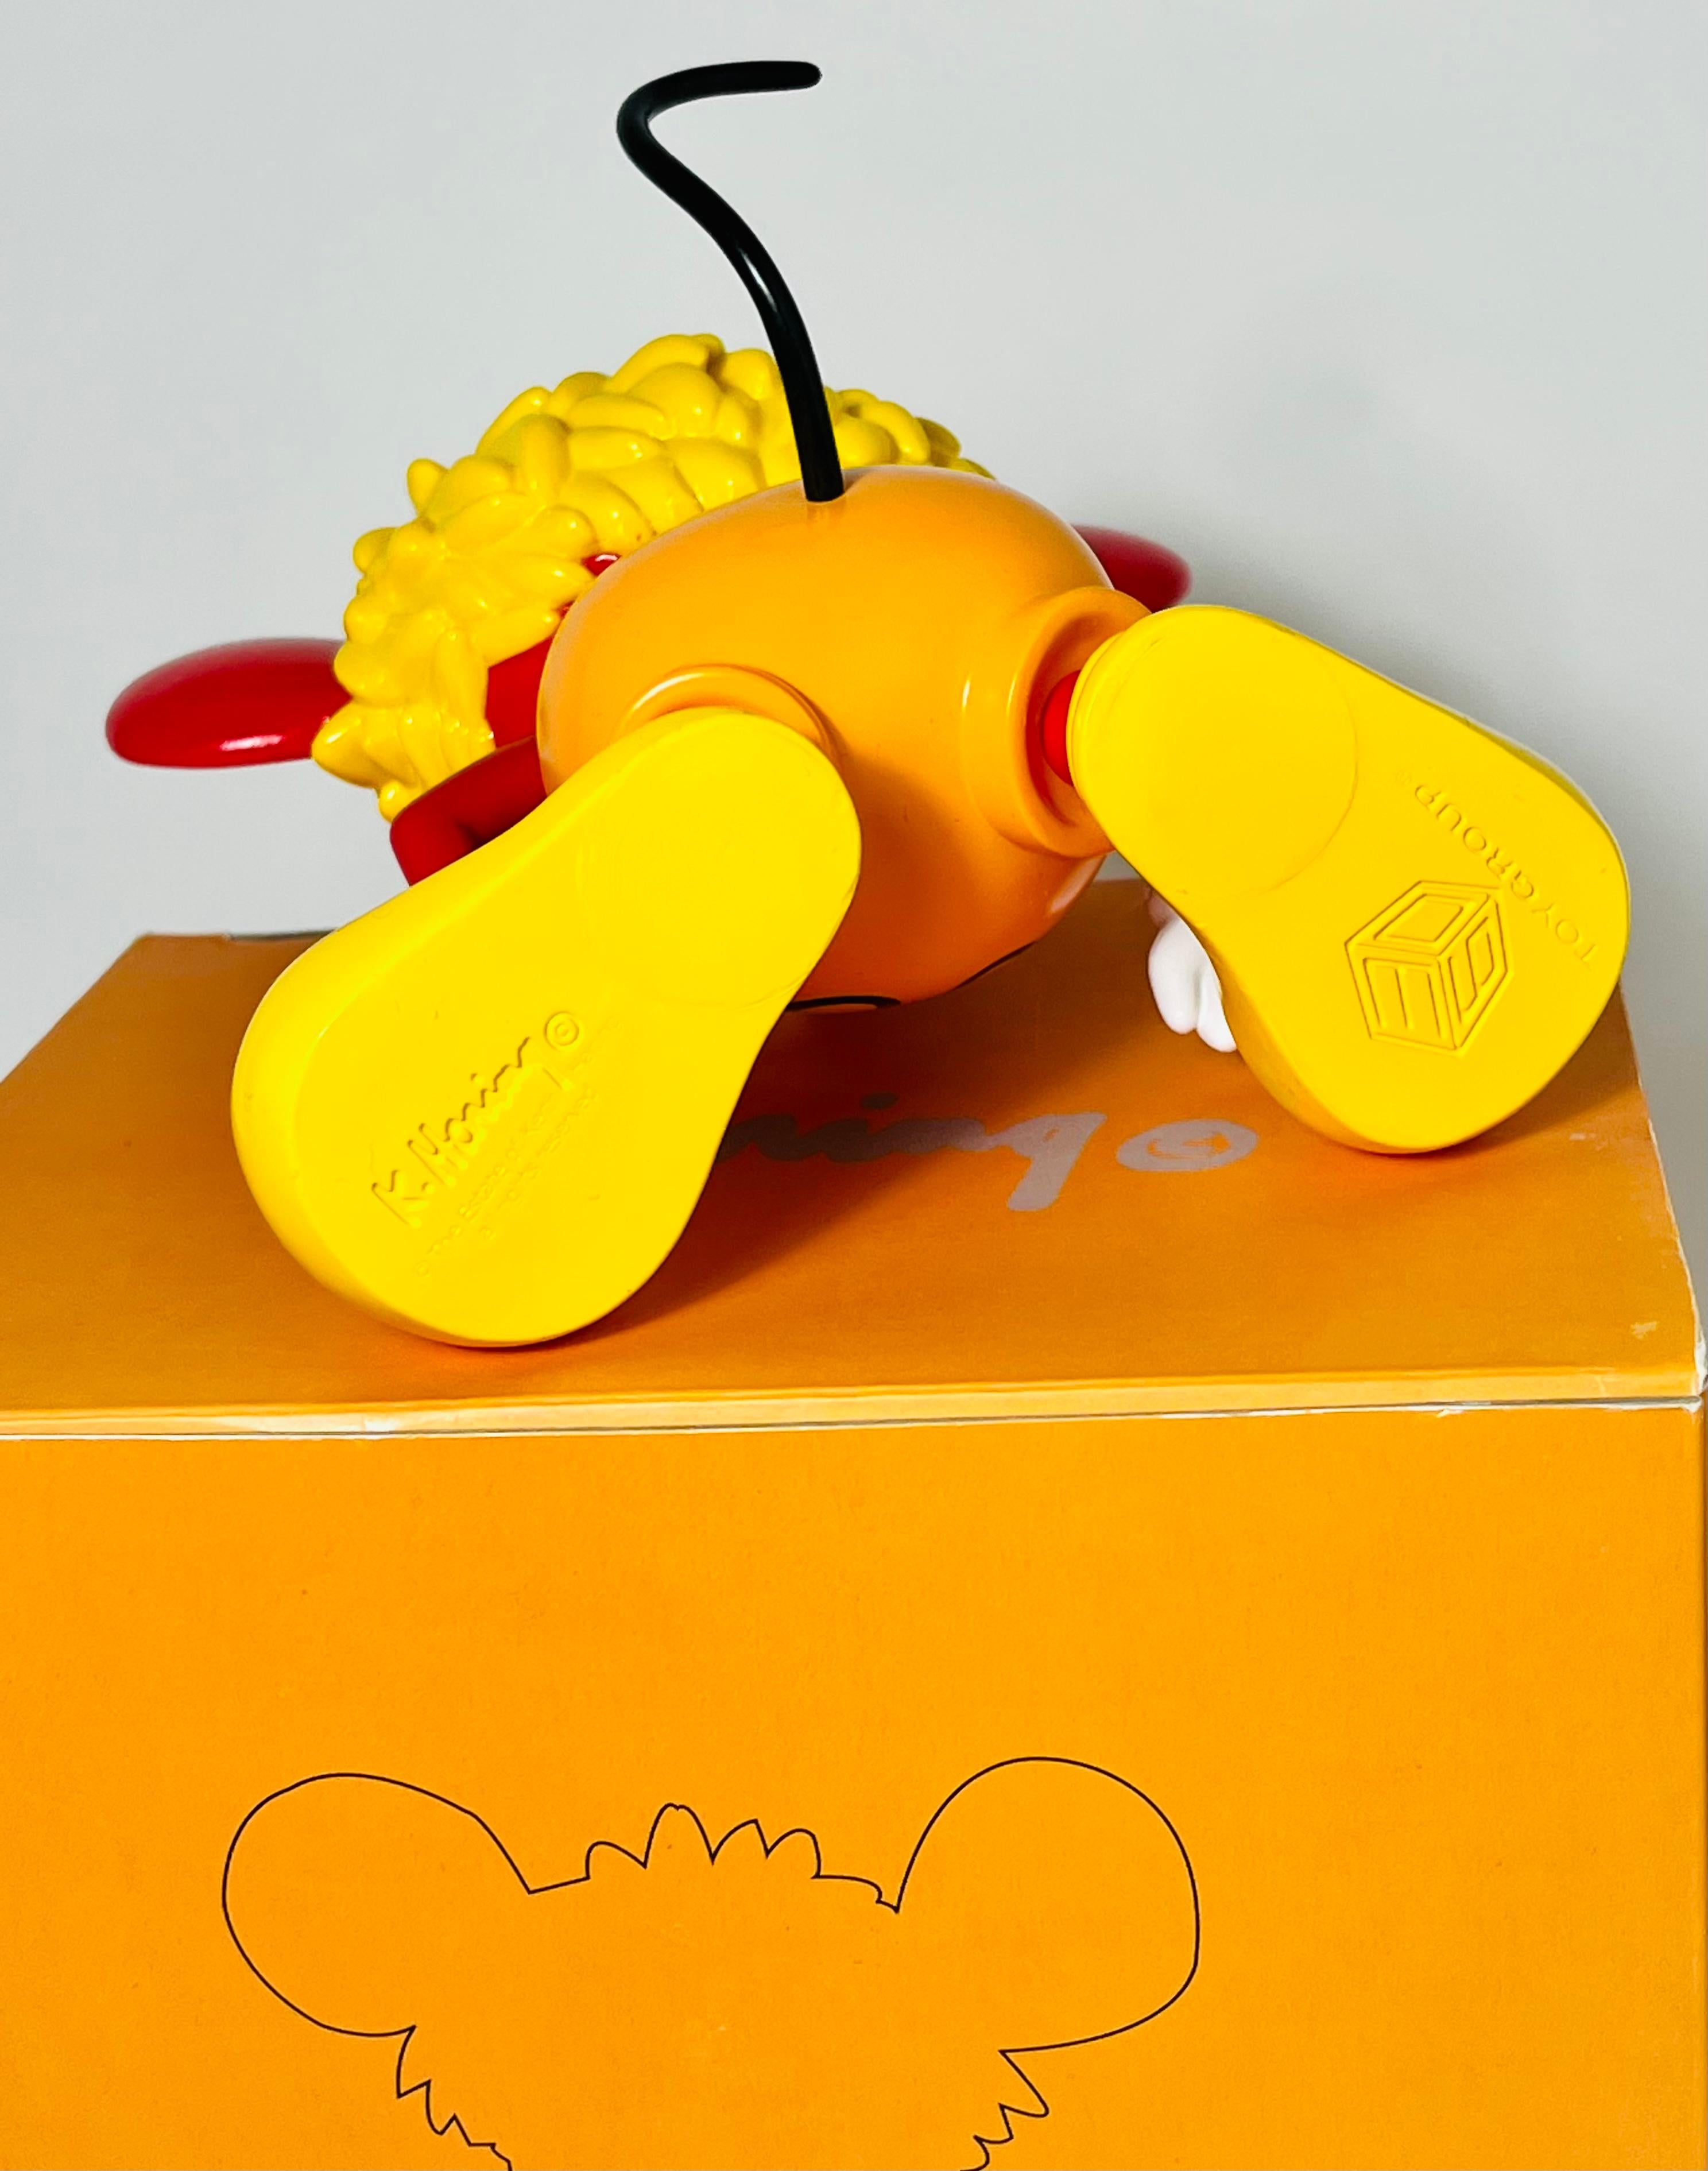 Keith Haring Andy Mouse art toy:
This rare limited edition Keith Haring Andy mouse art toy was published in 2005 & is licensed by the Estate of Keith Haring. The collectible reveals Keith Haring's 'Andy Mouse' artwork from the mid 1980s and is